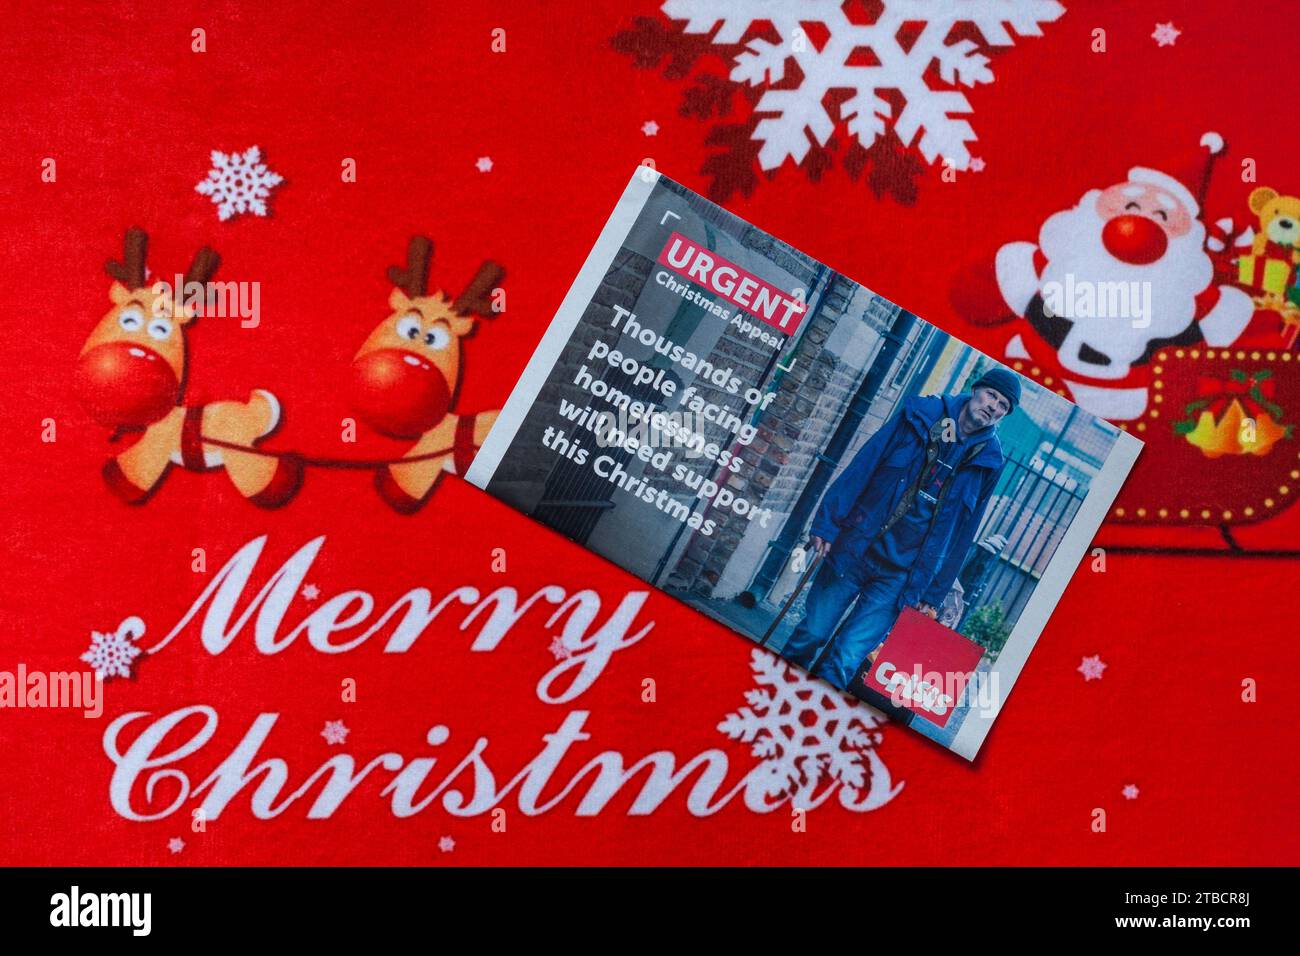 Post on Christmas mat, Merry Christmas - charity appeal from Crisis - thousands of people facing homelessness will need support this Christmas Stock Photo